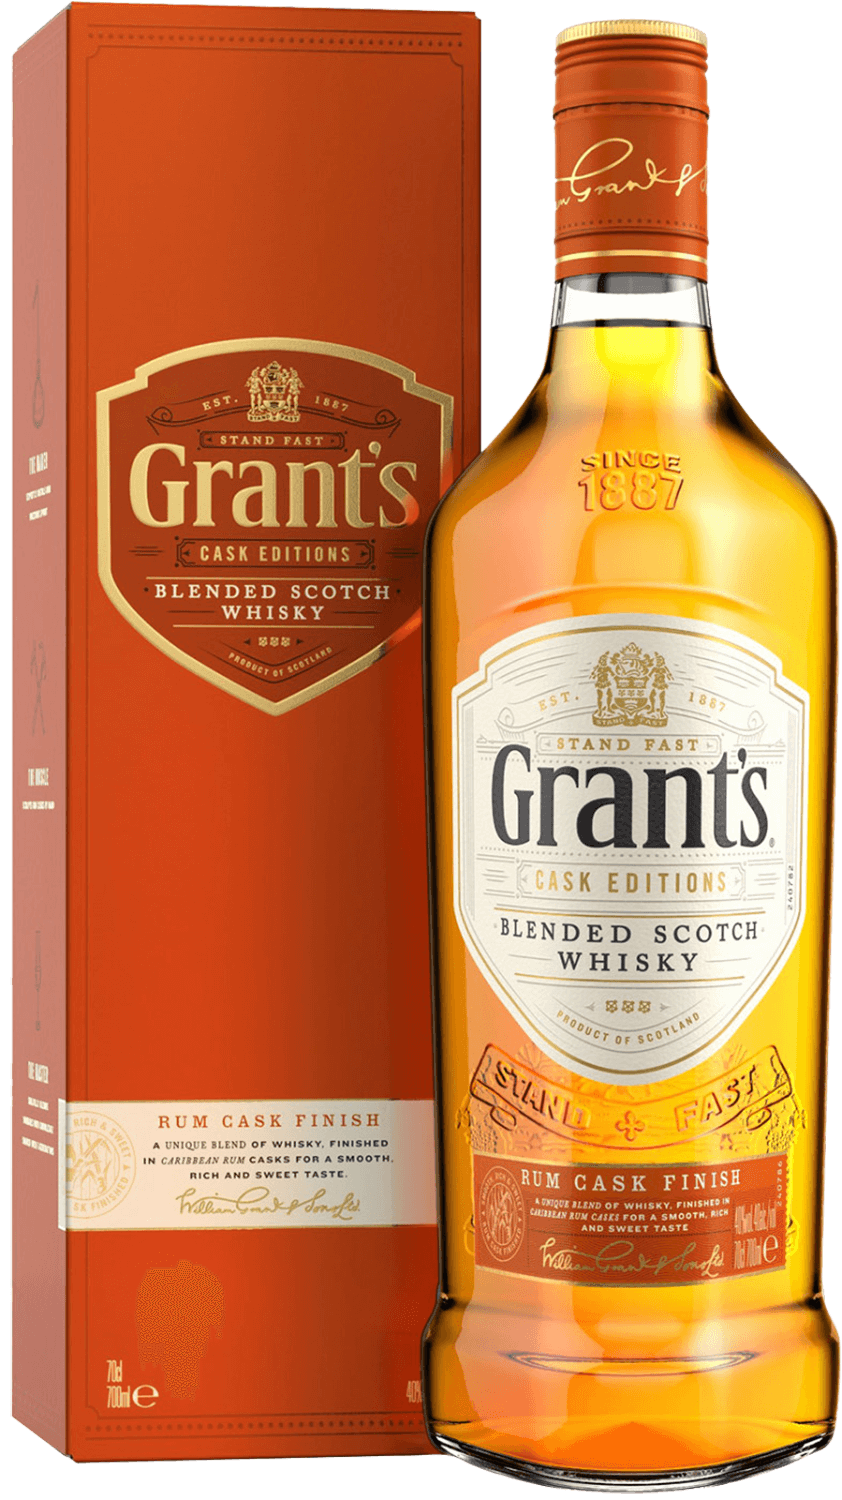 Grant's Rum Cask Finish Blended Scotch Whisky (gift box) angus dundee cask strength blended grain scotch whisky 50 y o gift box